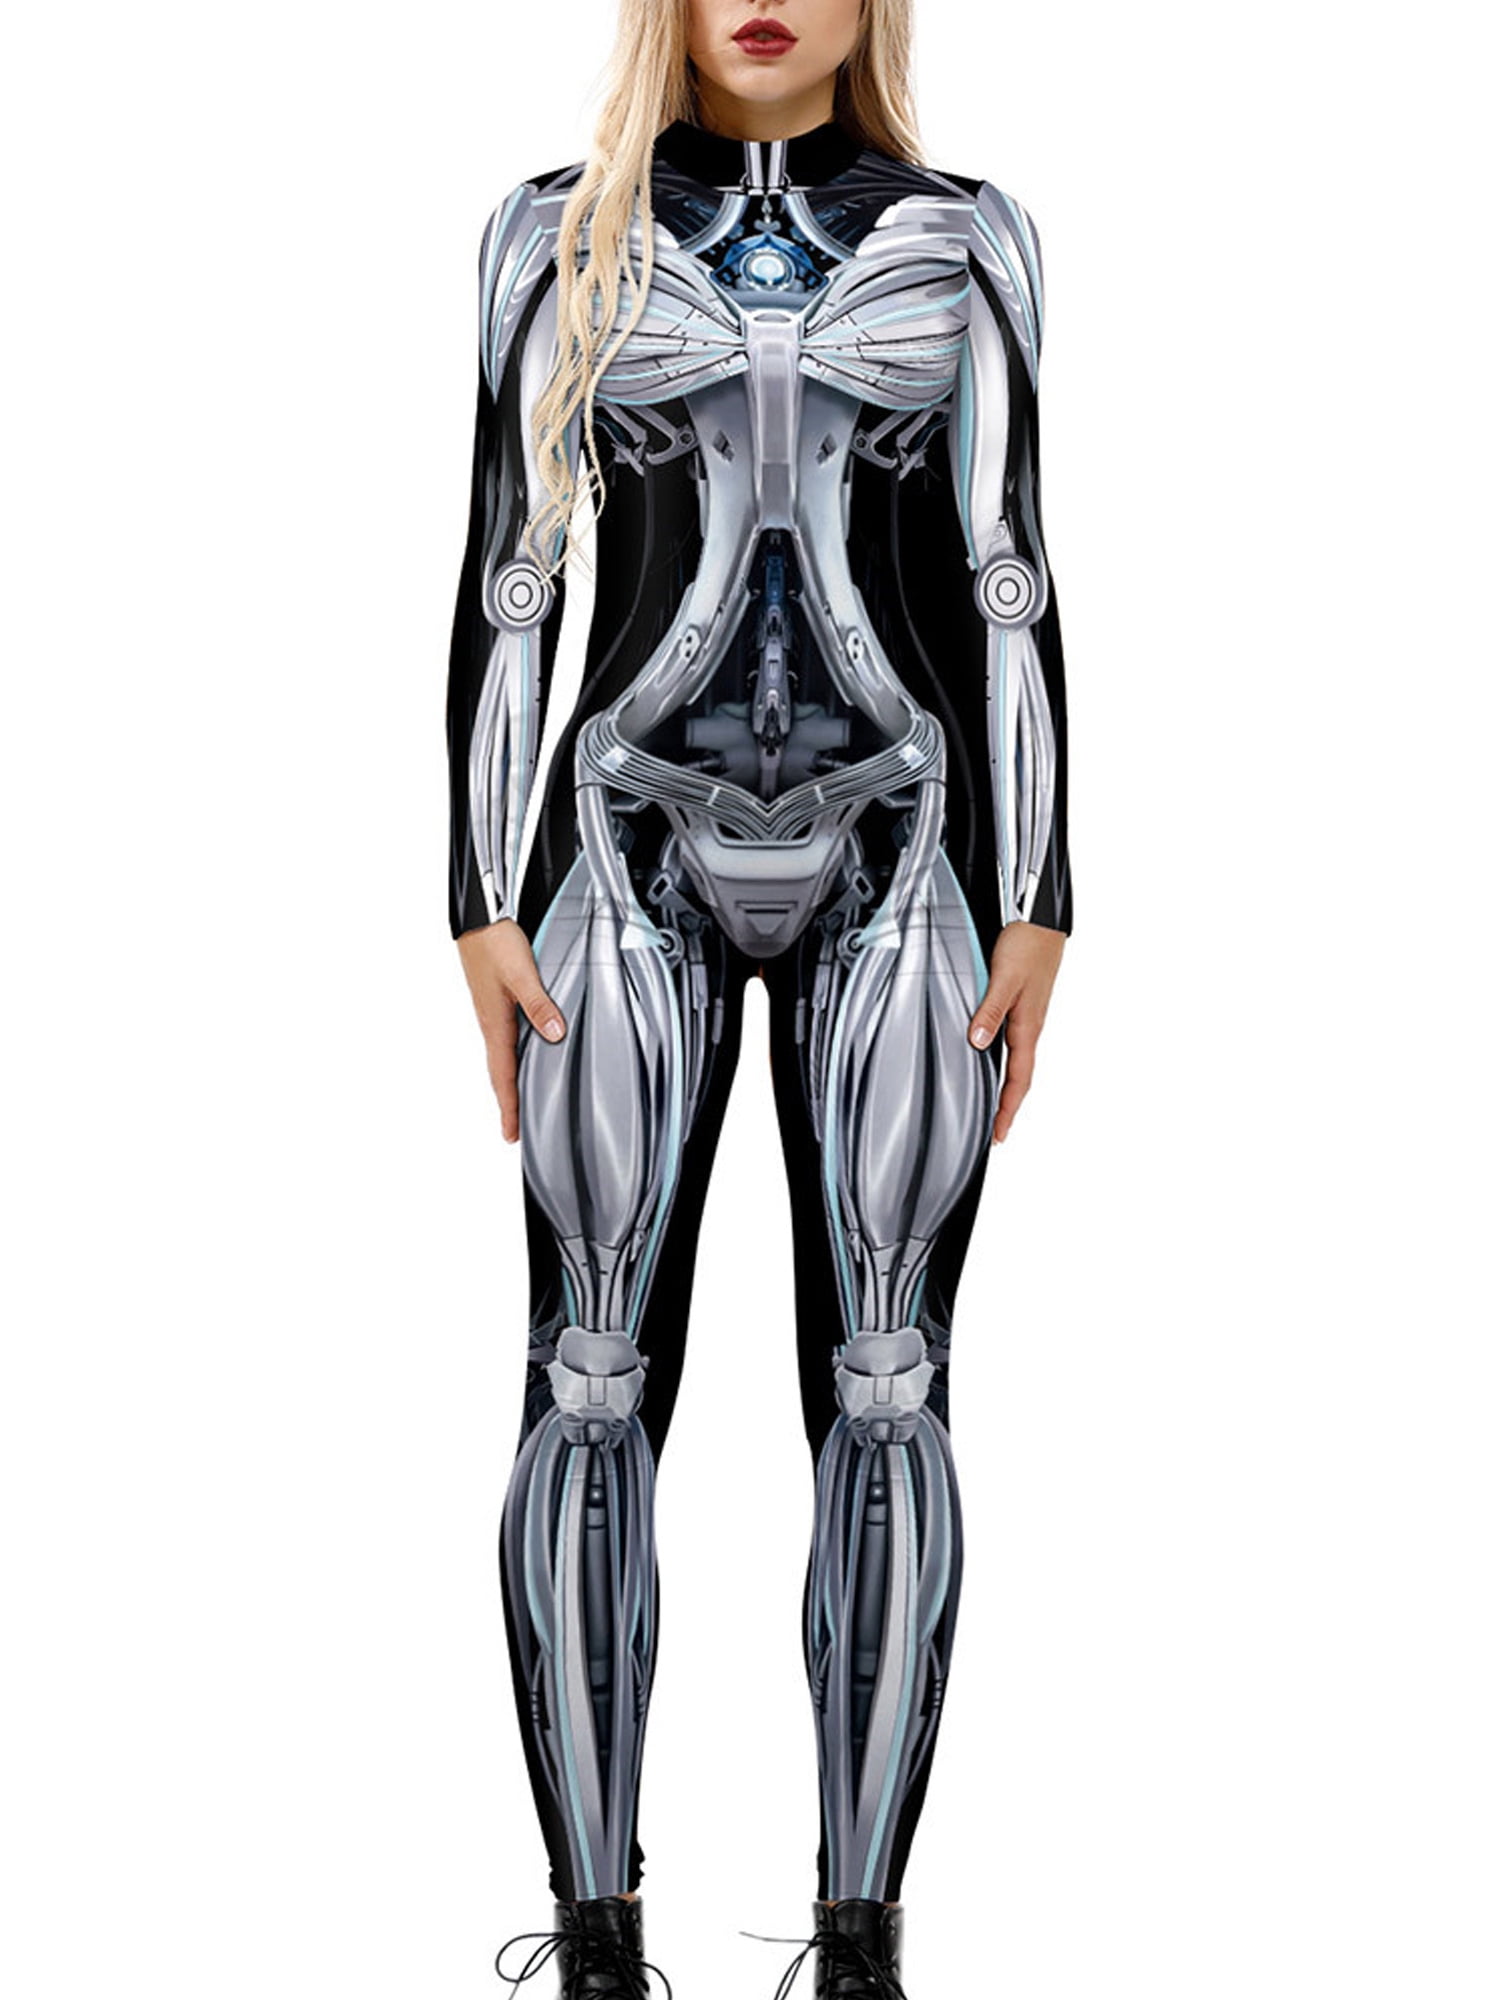 Womens Halloween Costume Skeleton Print Bodysuit Skinny Catsuit Jumpsuit Funny Long Sleeve Cosplay Bodycon Outfit